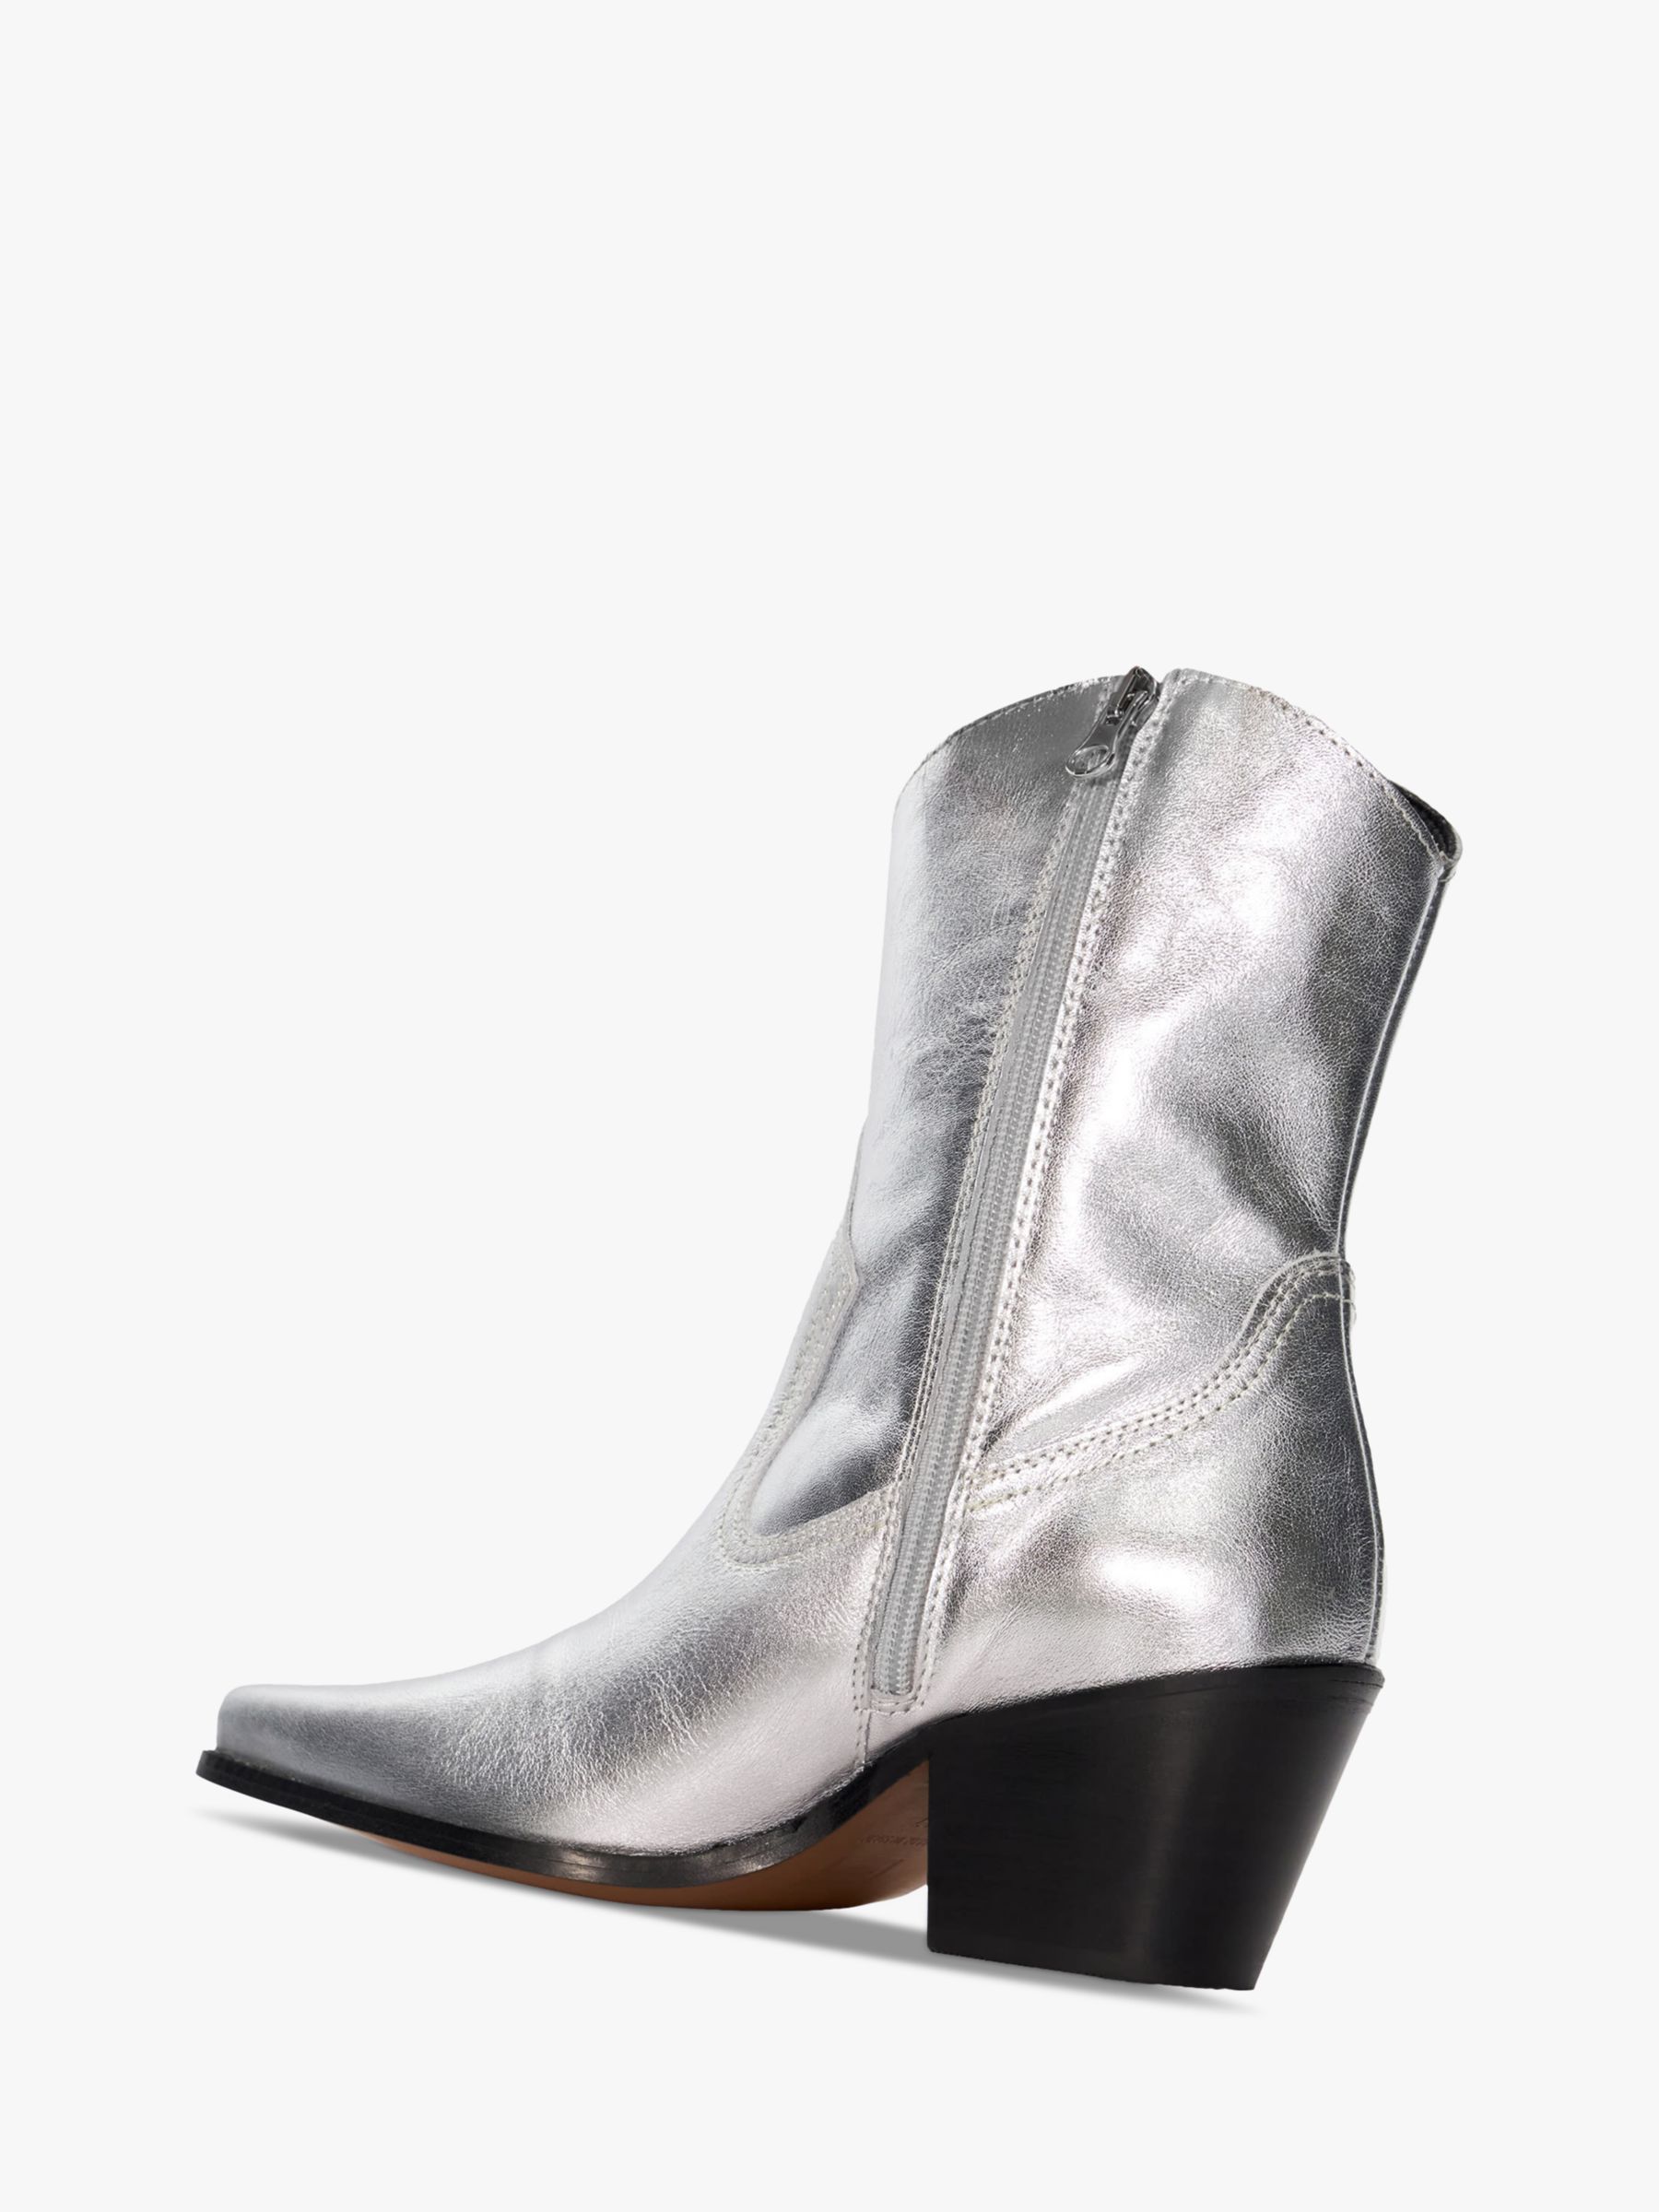 Buy Dune Pardner 2 Leather Cowboy Boots, Silver Online at johnlewis.com